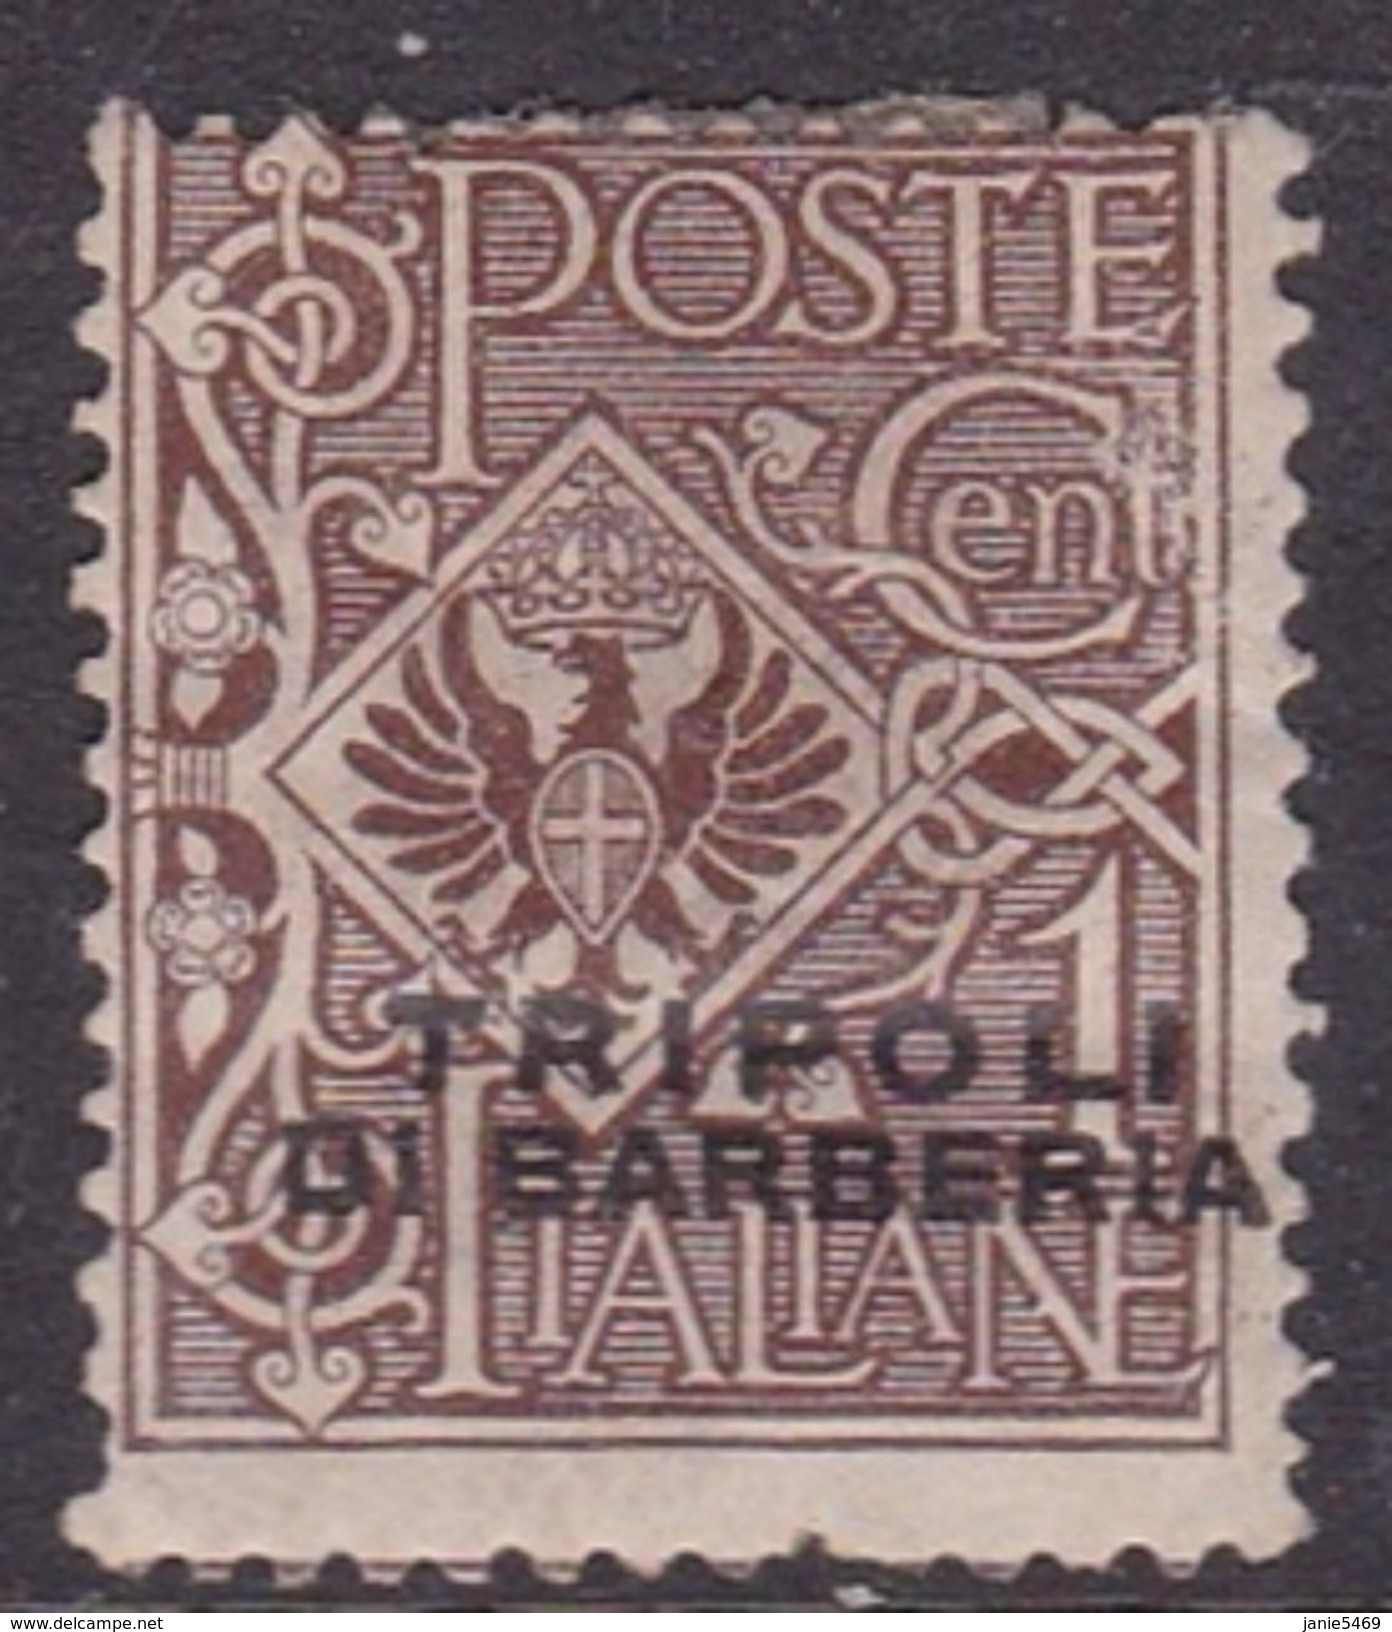 Italian Post Offices In The Levant, Tripoli Di Barberia S 11 1915 1c Brown, Mint Hinged - Emissions Générales